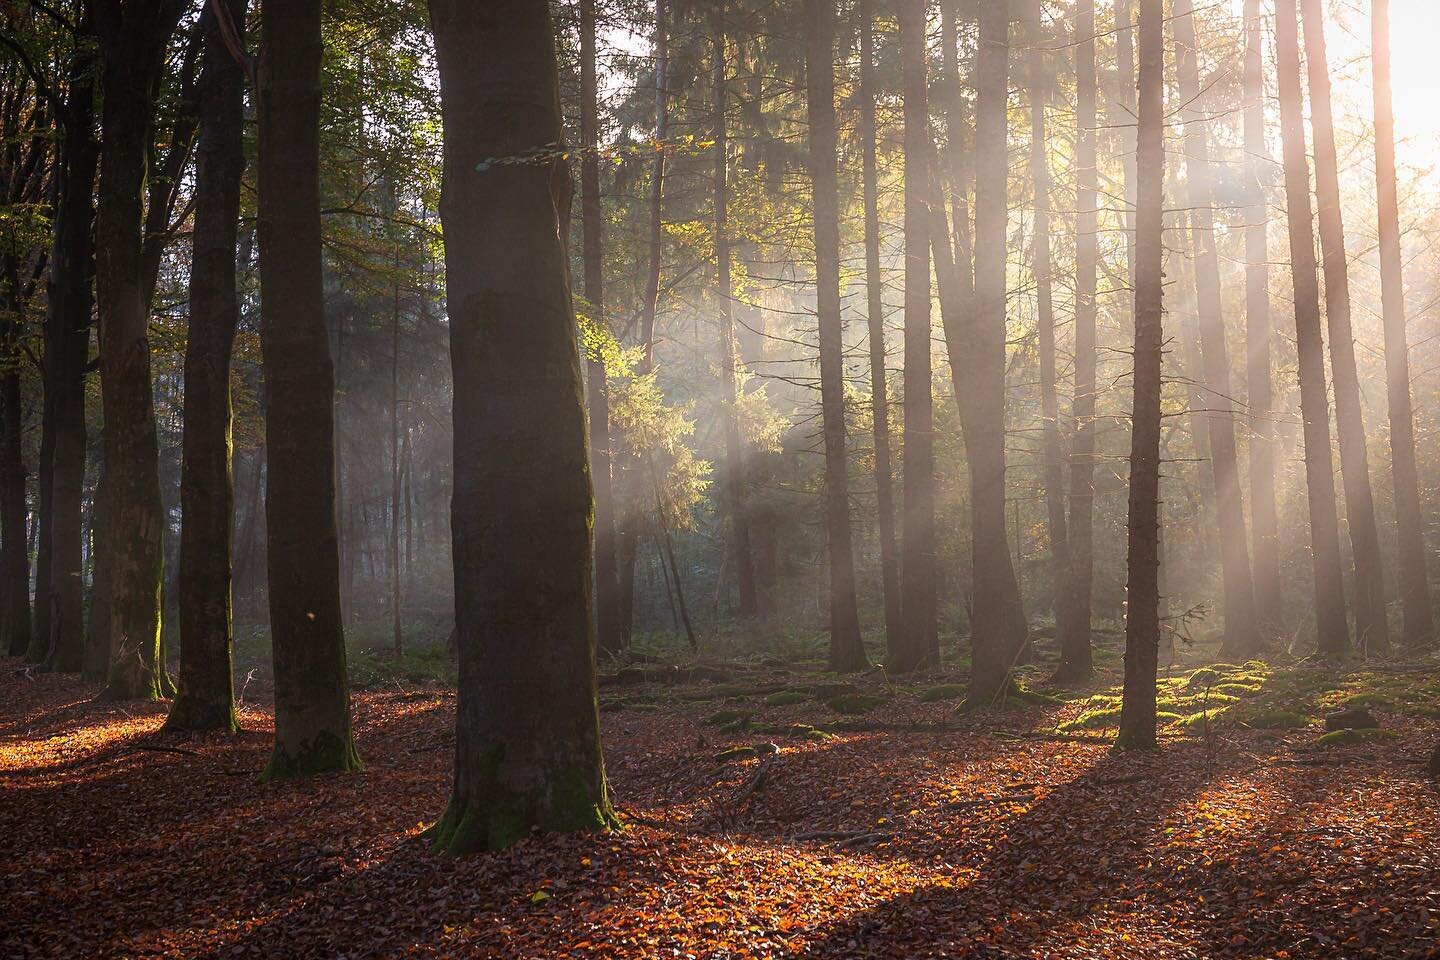 Is it autumn already? Shot this last year in end of oktober, in my hometown Enschede. 

Really amazing to get up early morning and catch a foggy morning sunshine through a forest